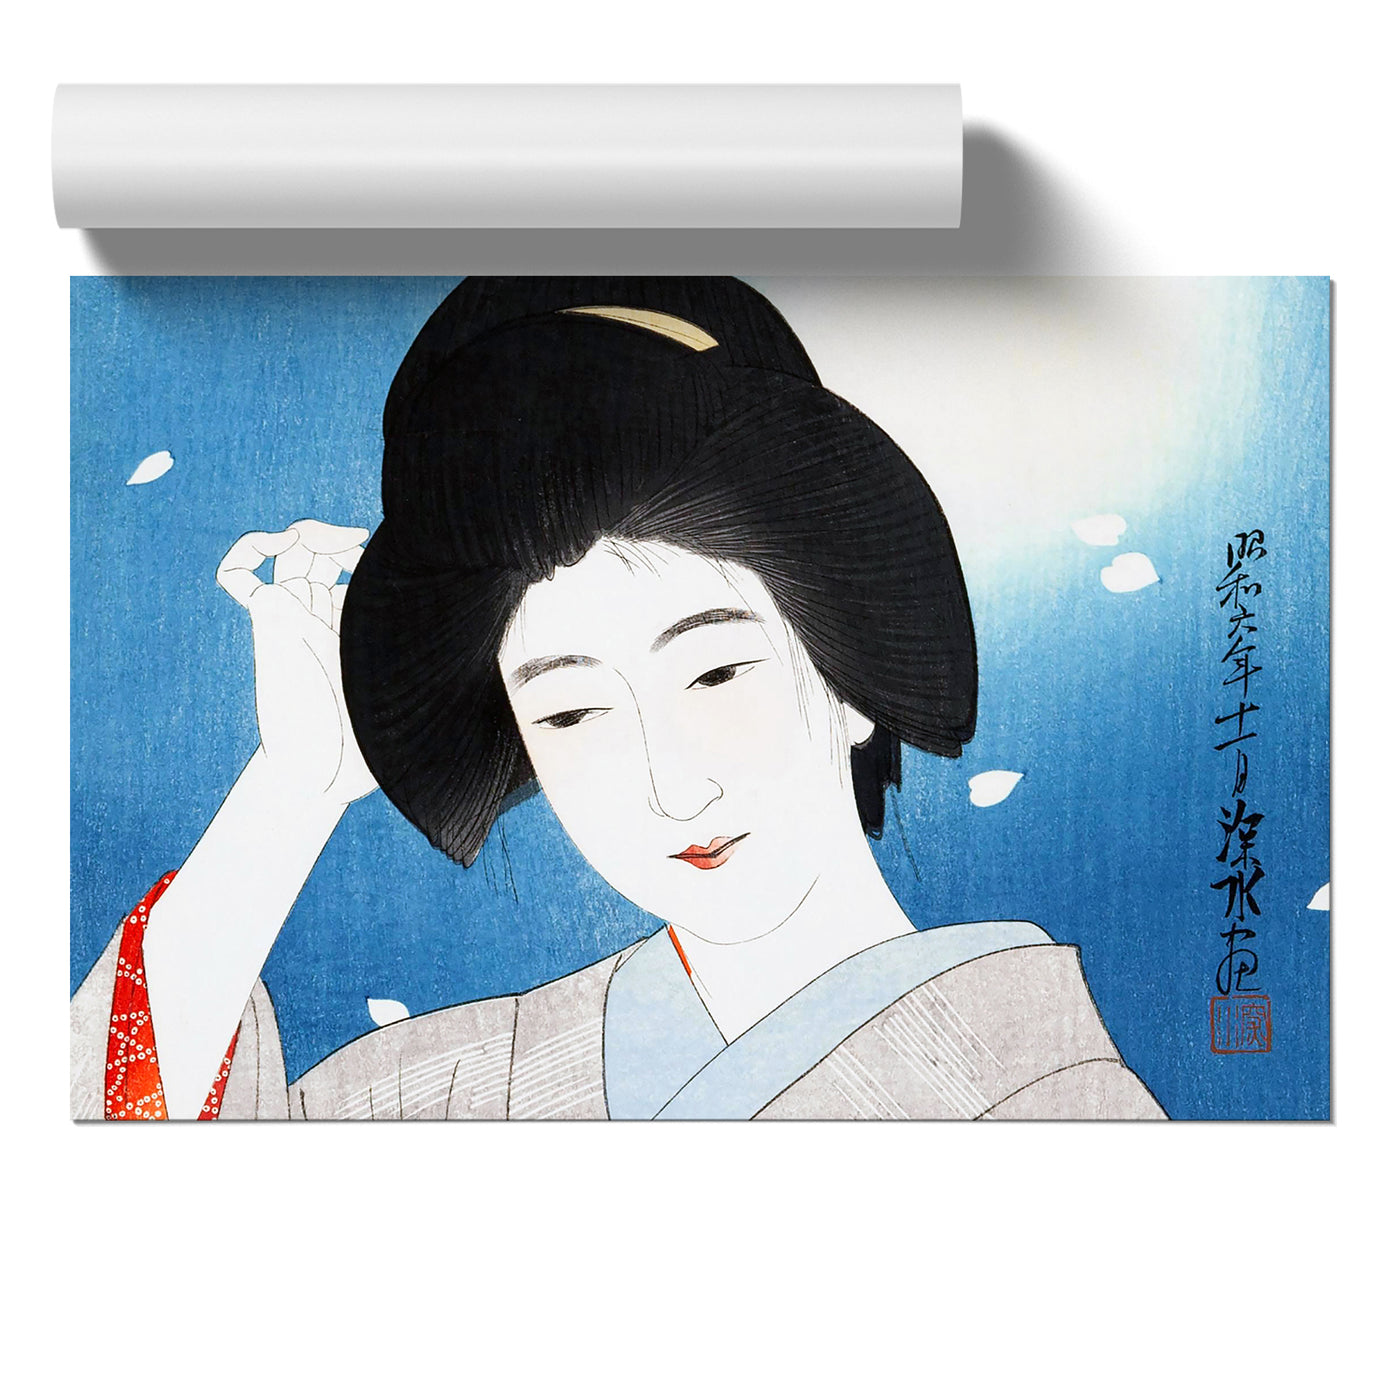 Under The Moonlight By Ito Shinsui